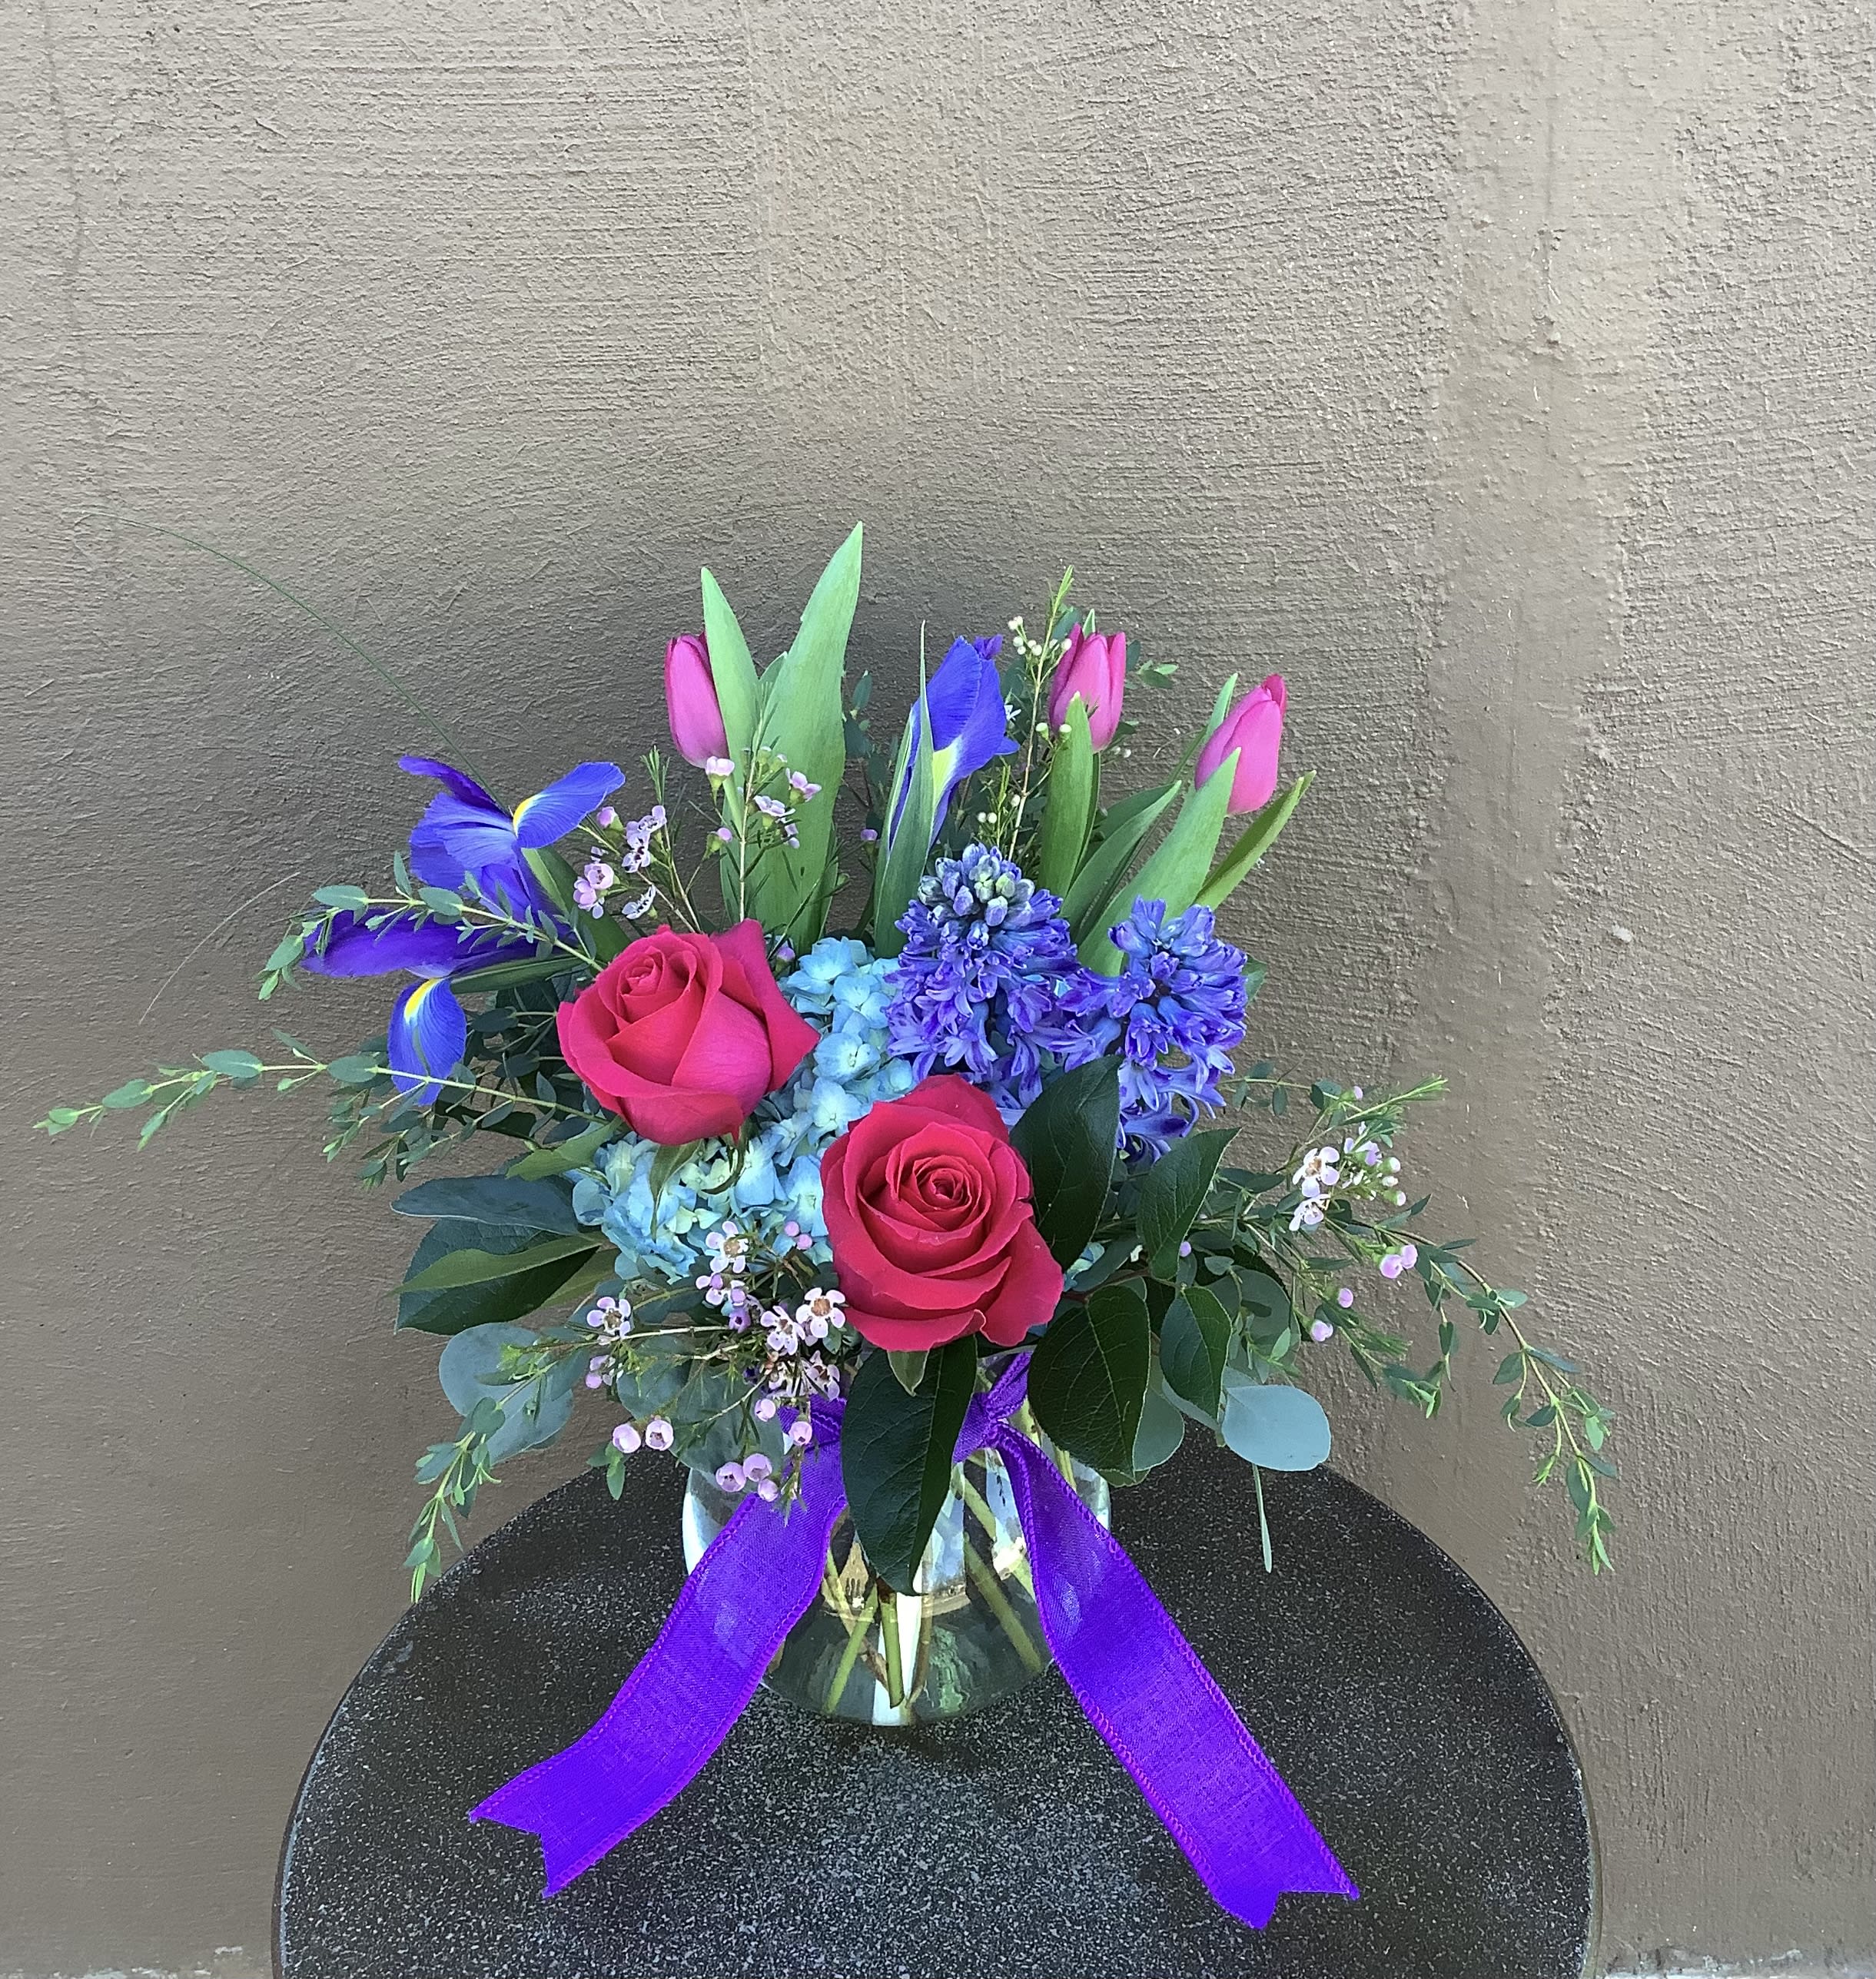 Spring Jewels - This jewel-tone spring arrangement is filled with spring bulb flowers, tulips, iris, and hyacinth, along with vibrant roses and hydrangea. Definitely the crown jewel of spring! 